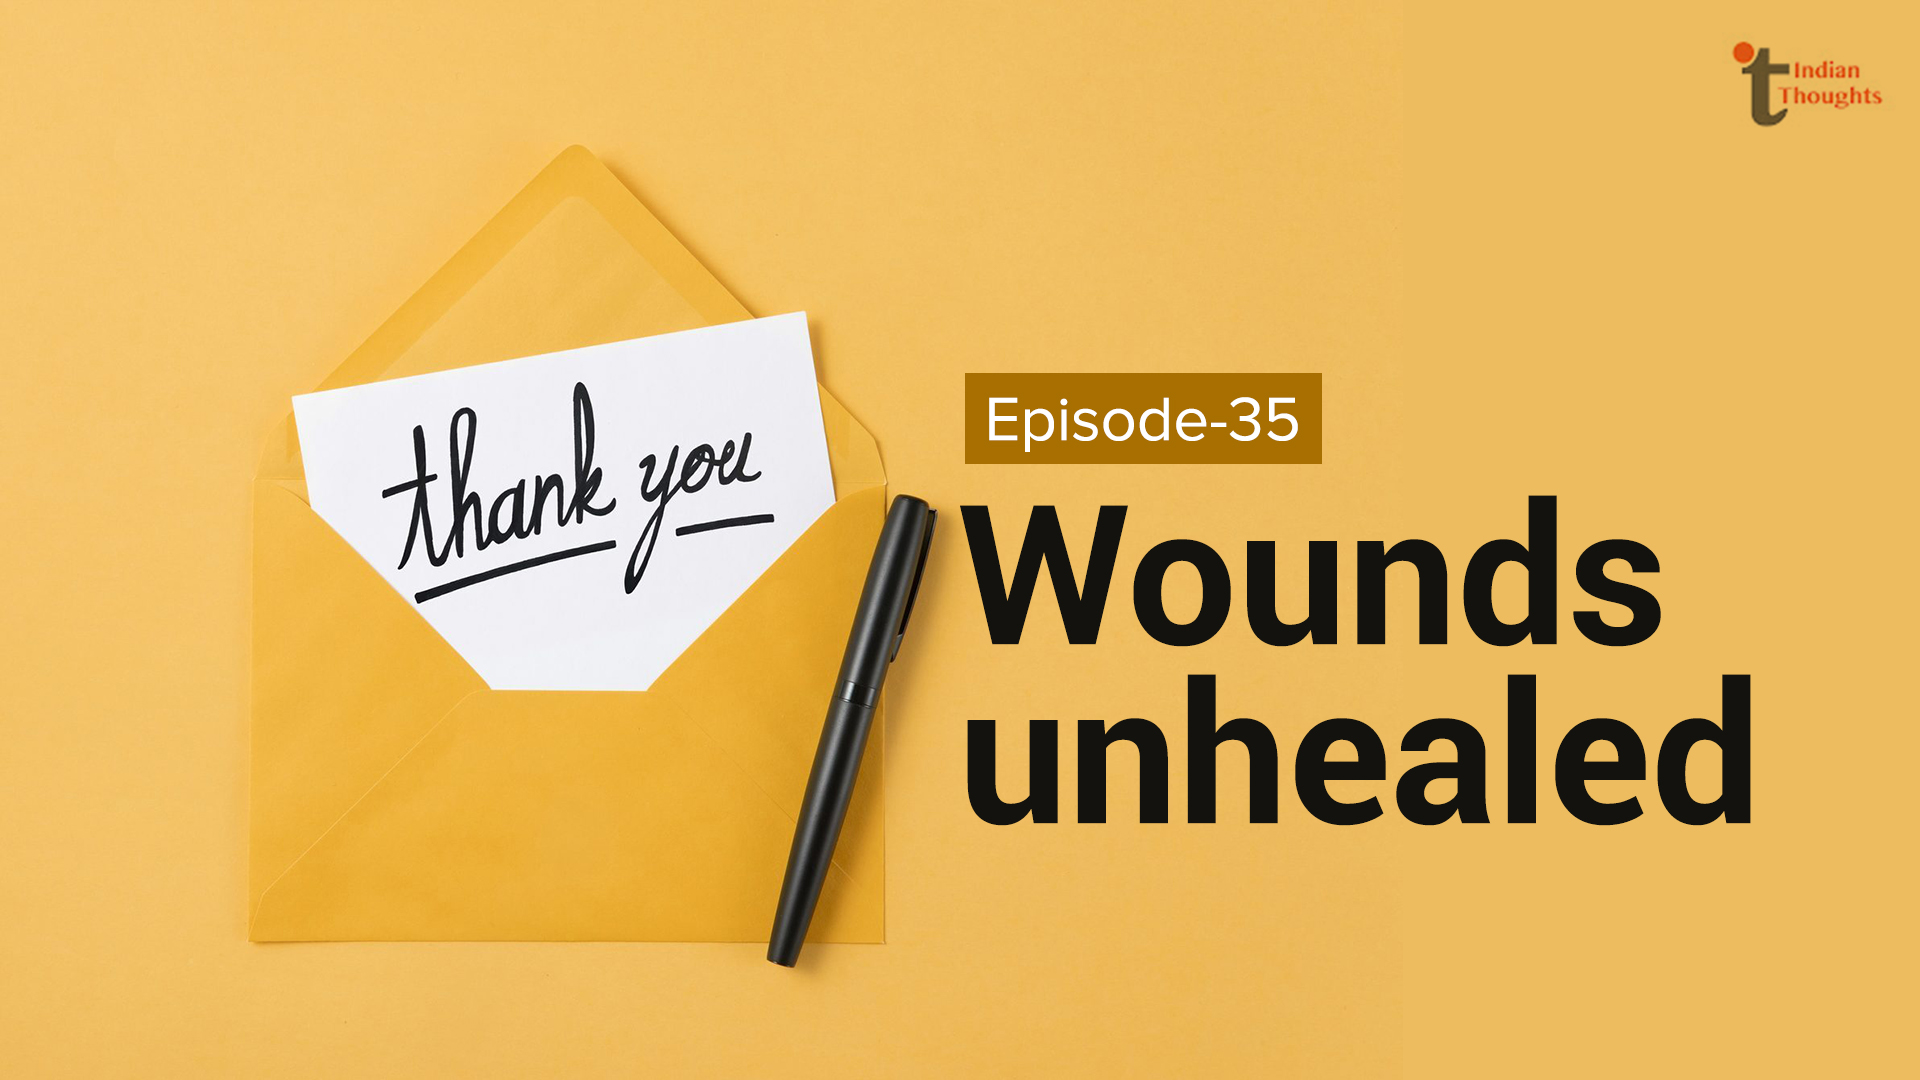 Wounds unhealed